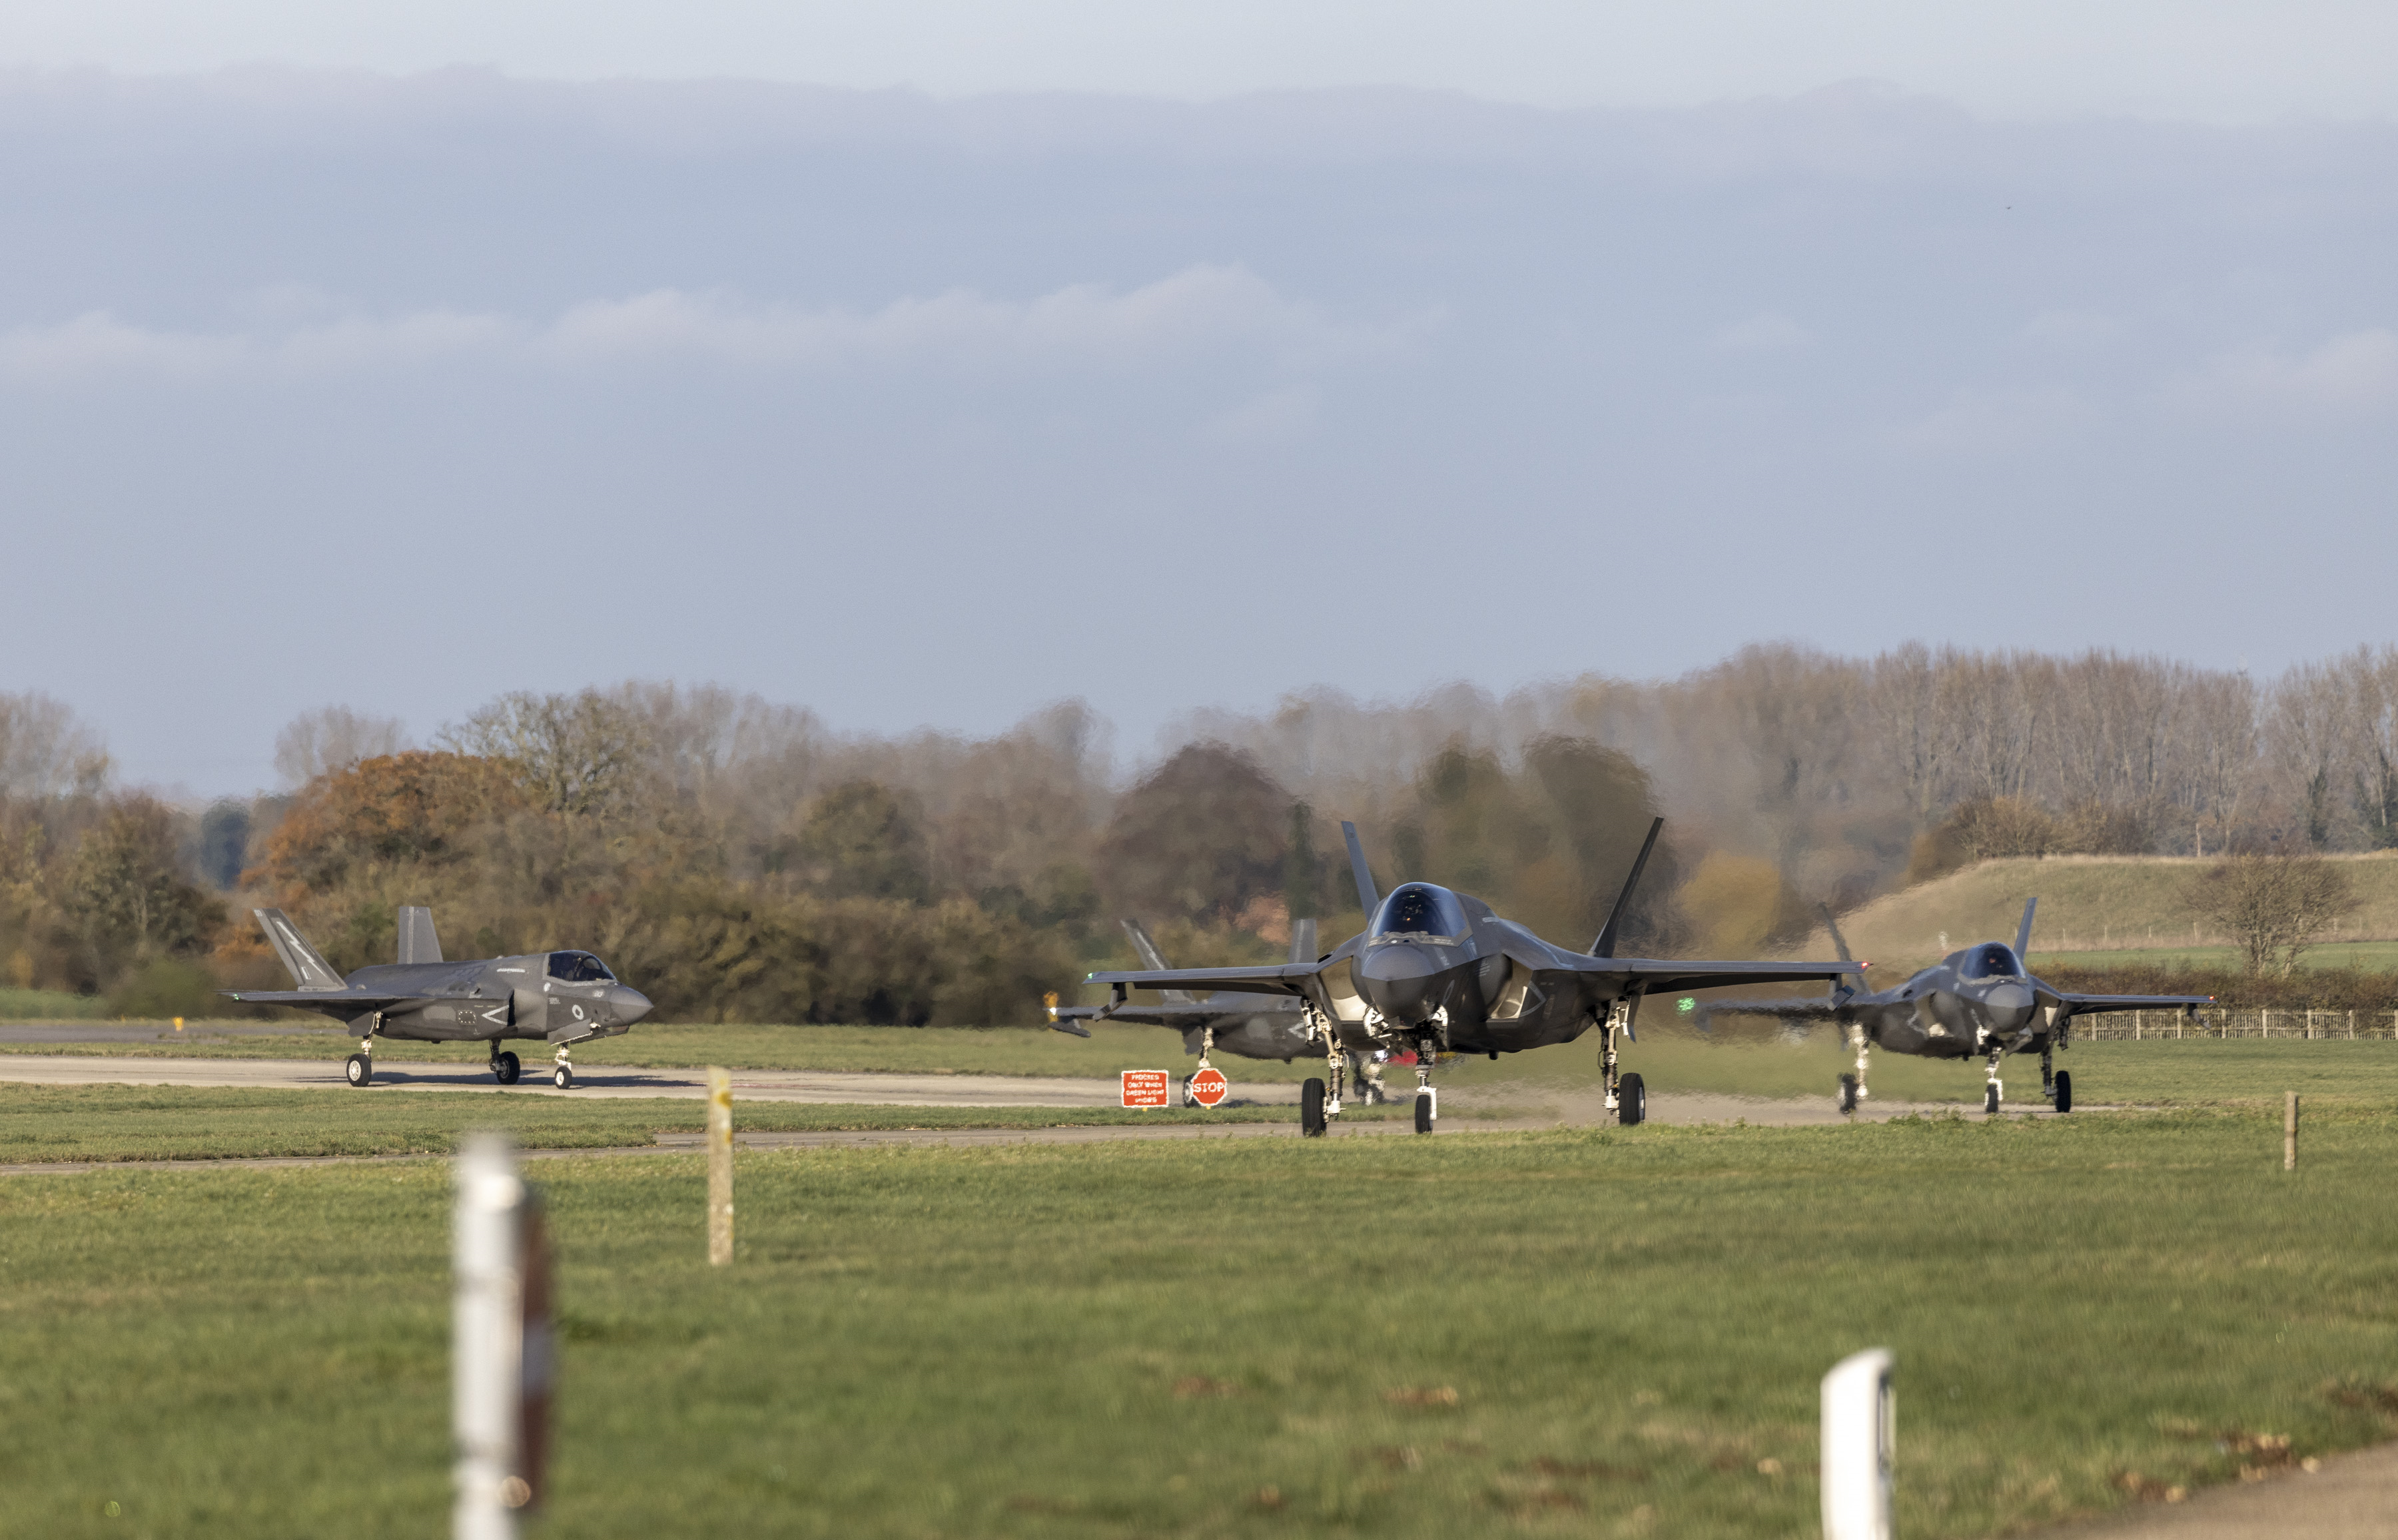 Image shows RAF Typhoons taxiing on the runway.